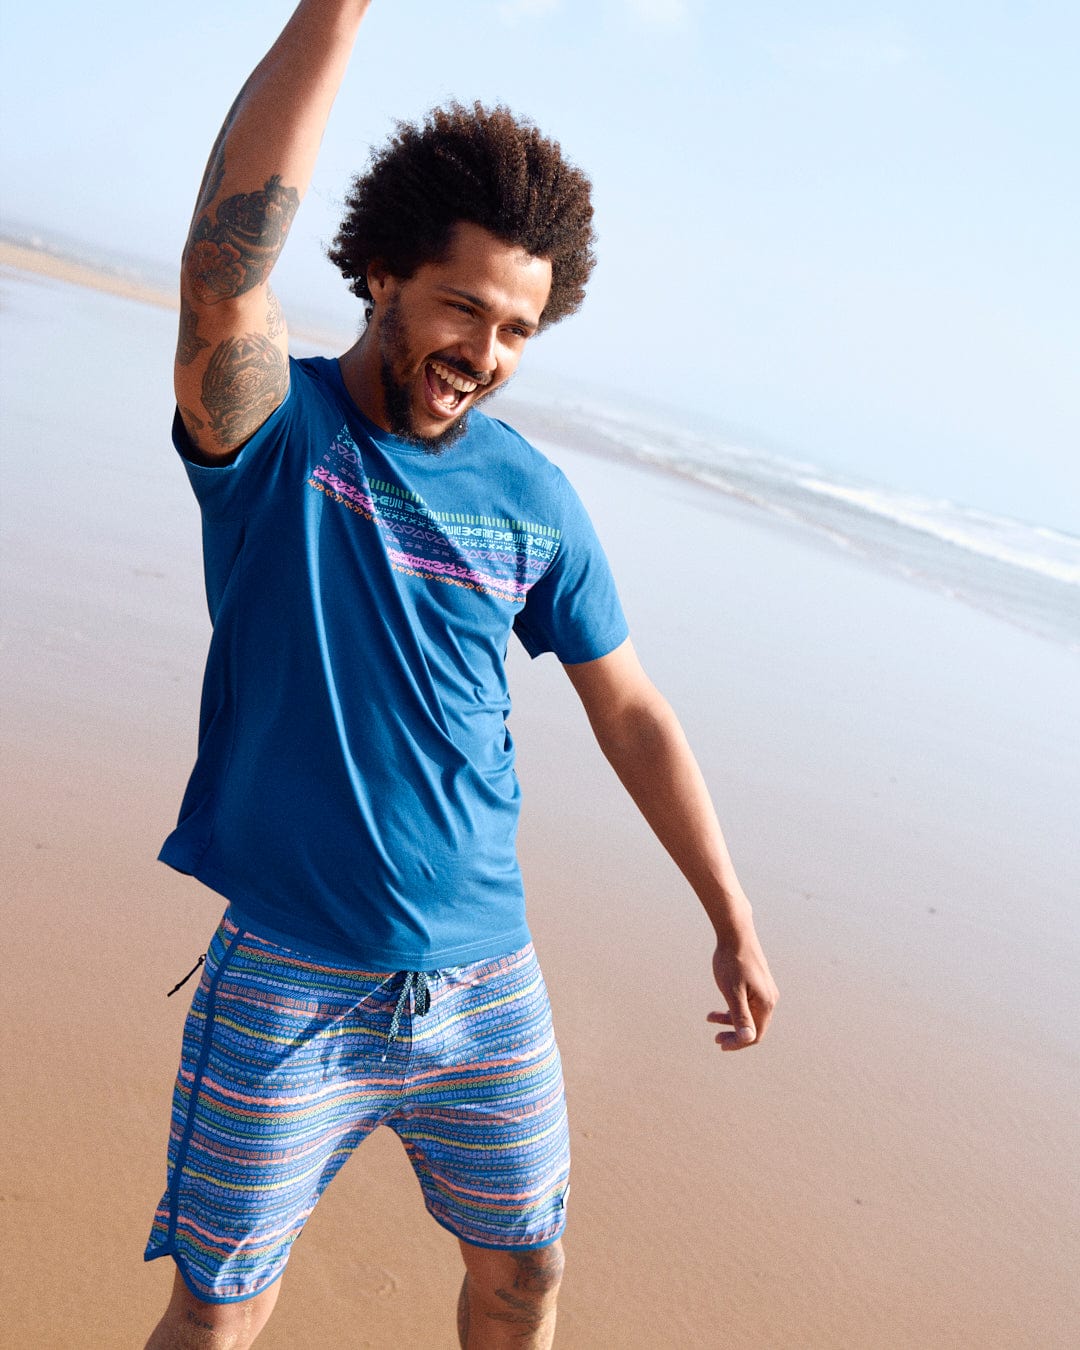 A joyful man with a beard and tattoos raises his arm while walking on a sandy beach, wearing a Marks Chest - Mens Short Sleeve T-Shirt in Blue made of peached soft material and colorful shorts.